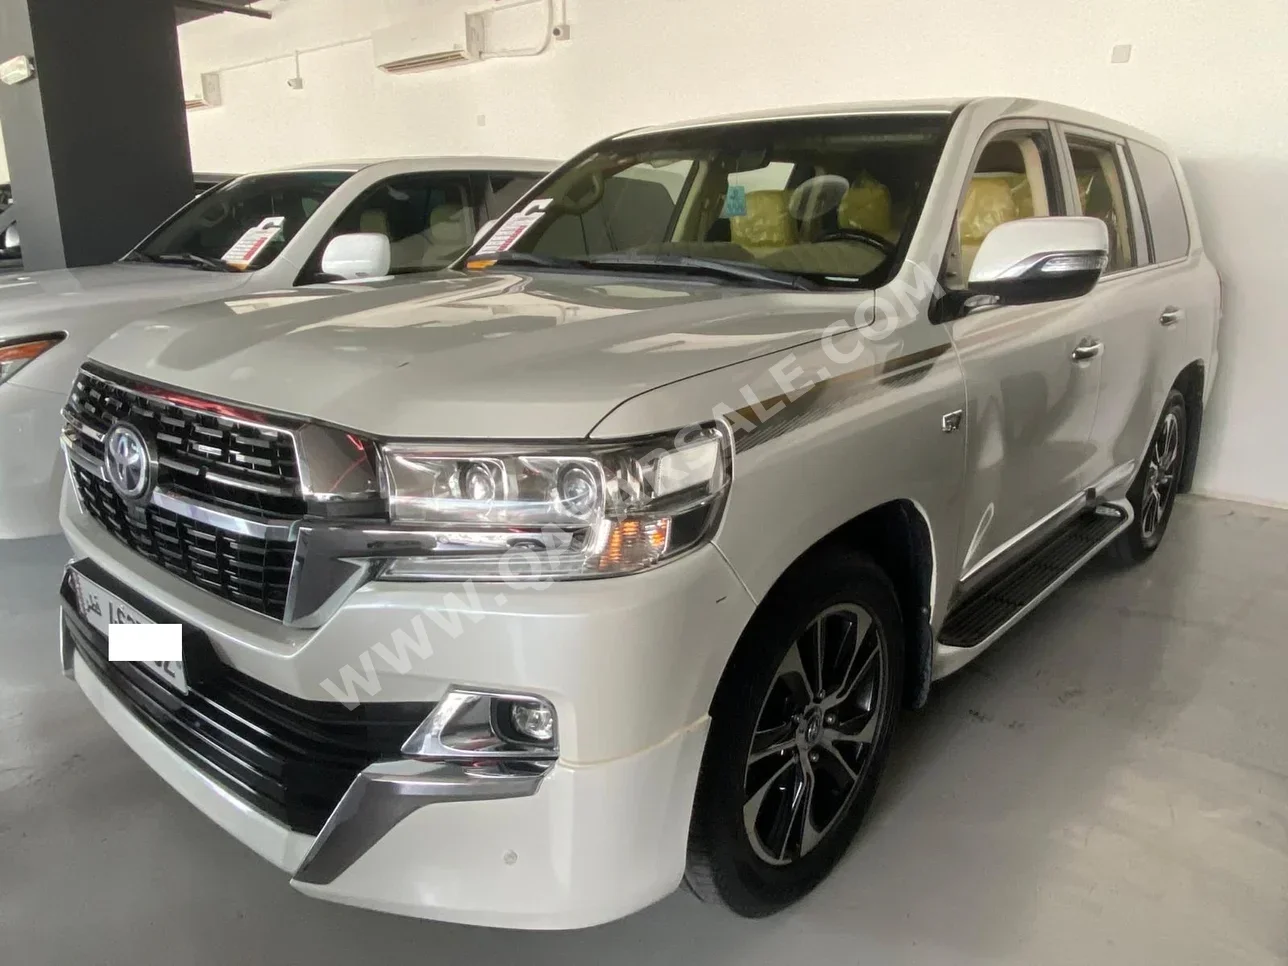 Toyota  Land Cruiser  GXR- Grand Touring  2017  Automatic  253,000 Km  8 Cylinder  Four Wheel Drive (4WD)  SUV  White